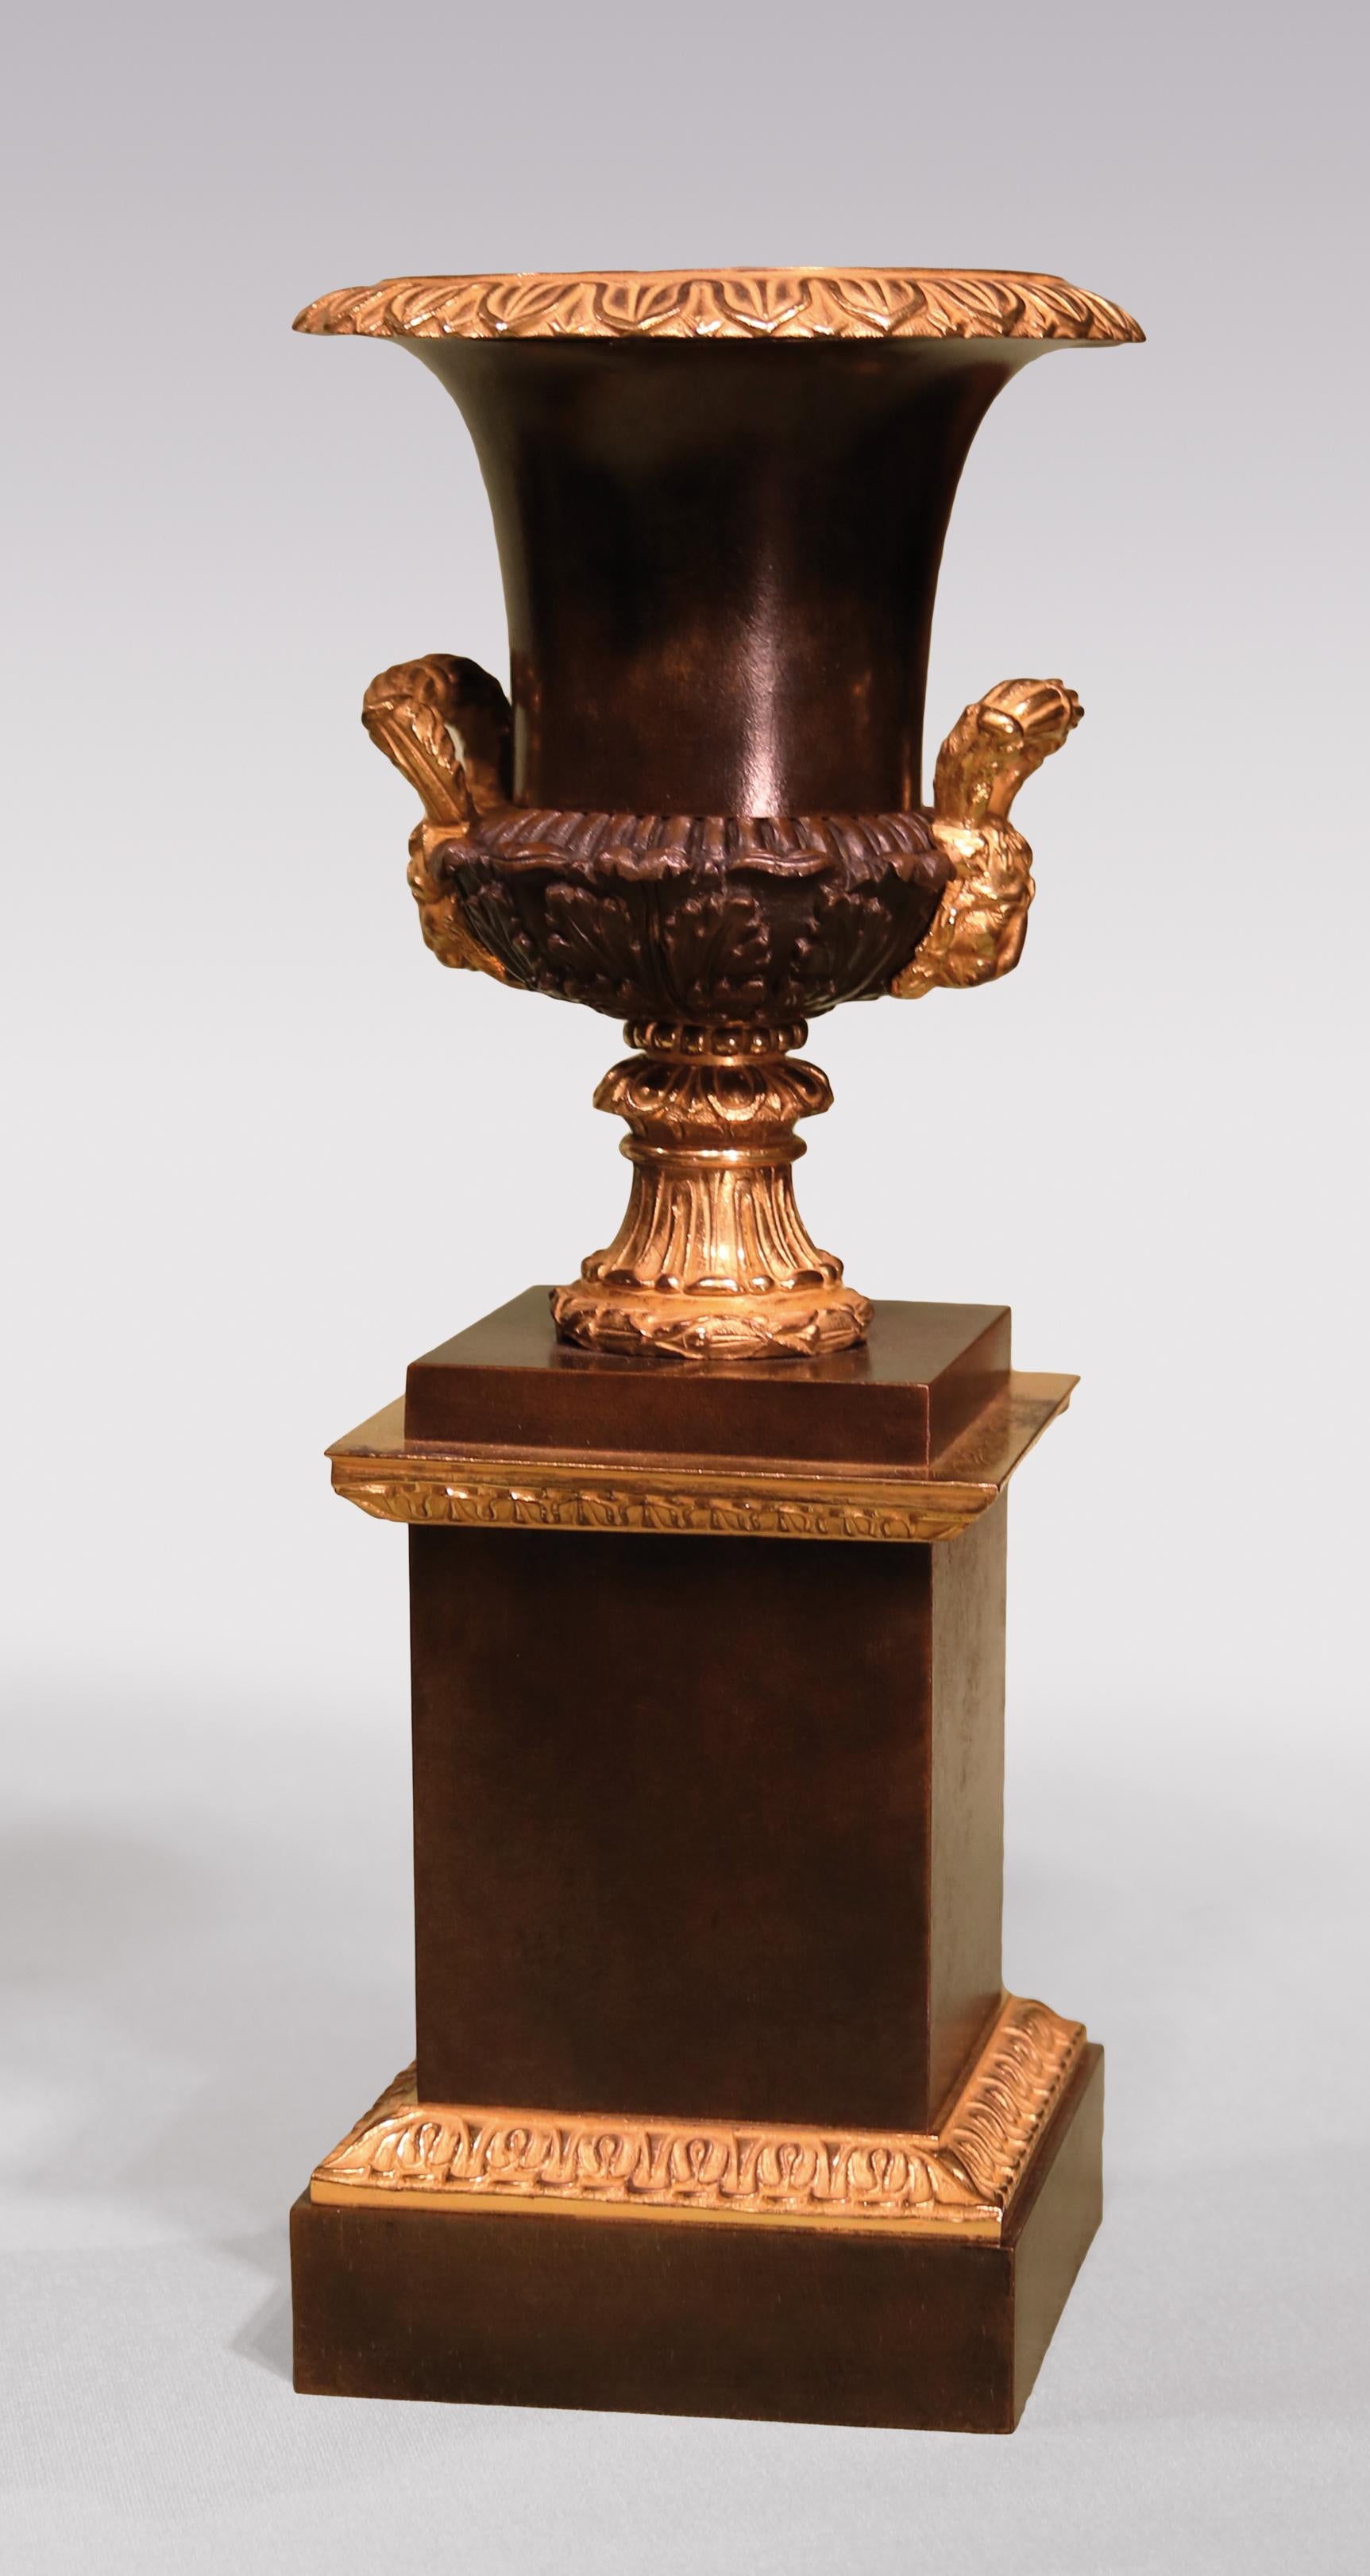 A pair of early 19th century Regency period bronze and ormolu campana shaped Urns, having leaf moulded rims above acanthus leaf decoration with lion's head handles, supported on plinth bases.